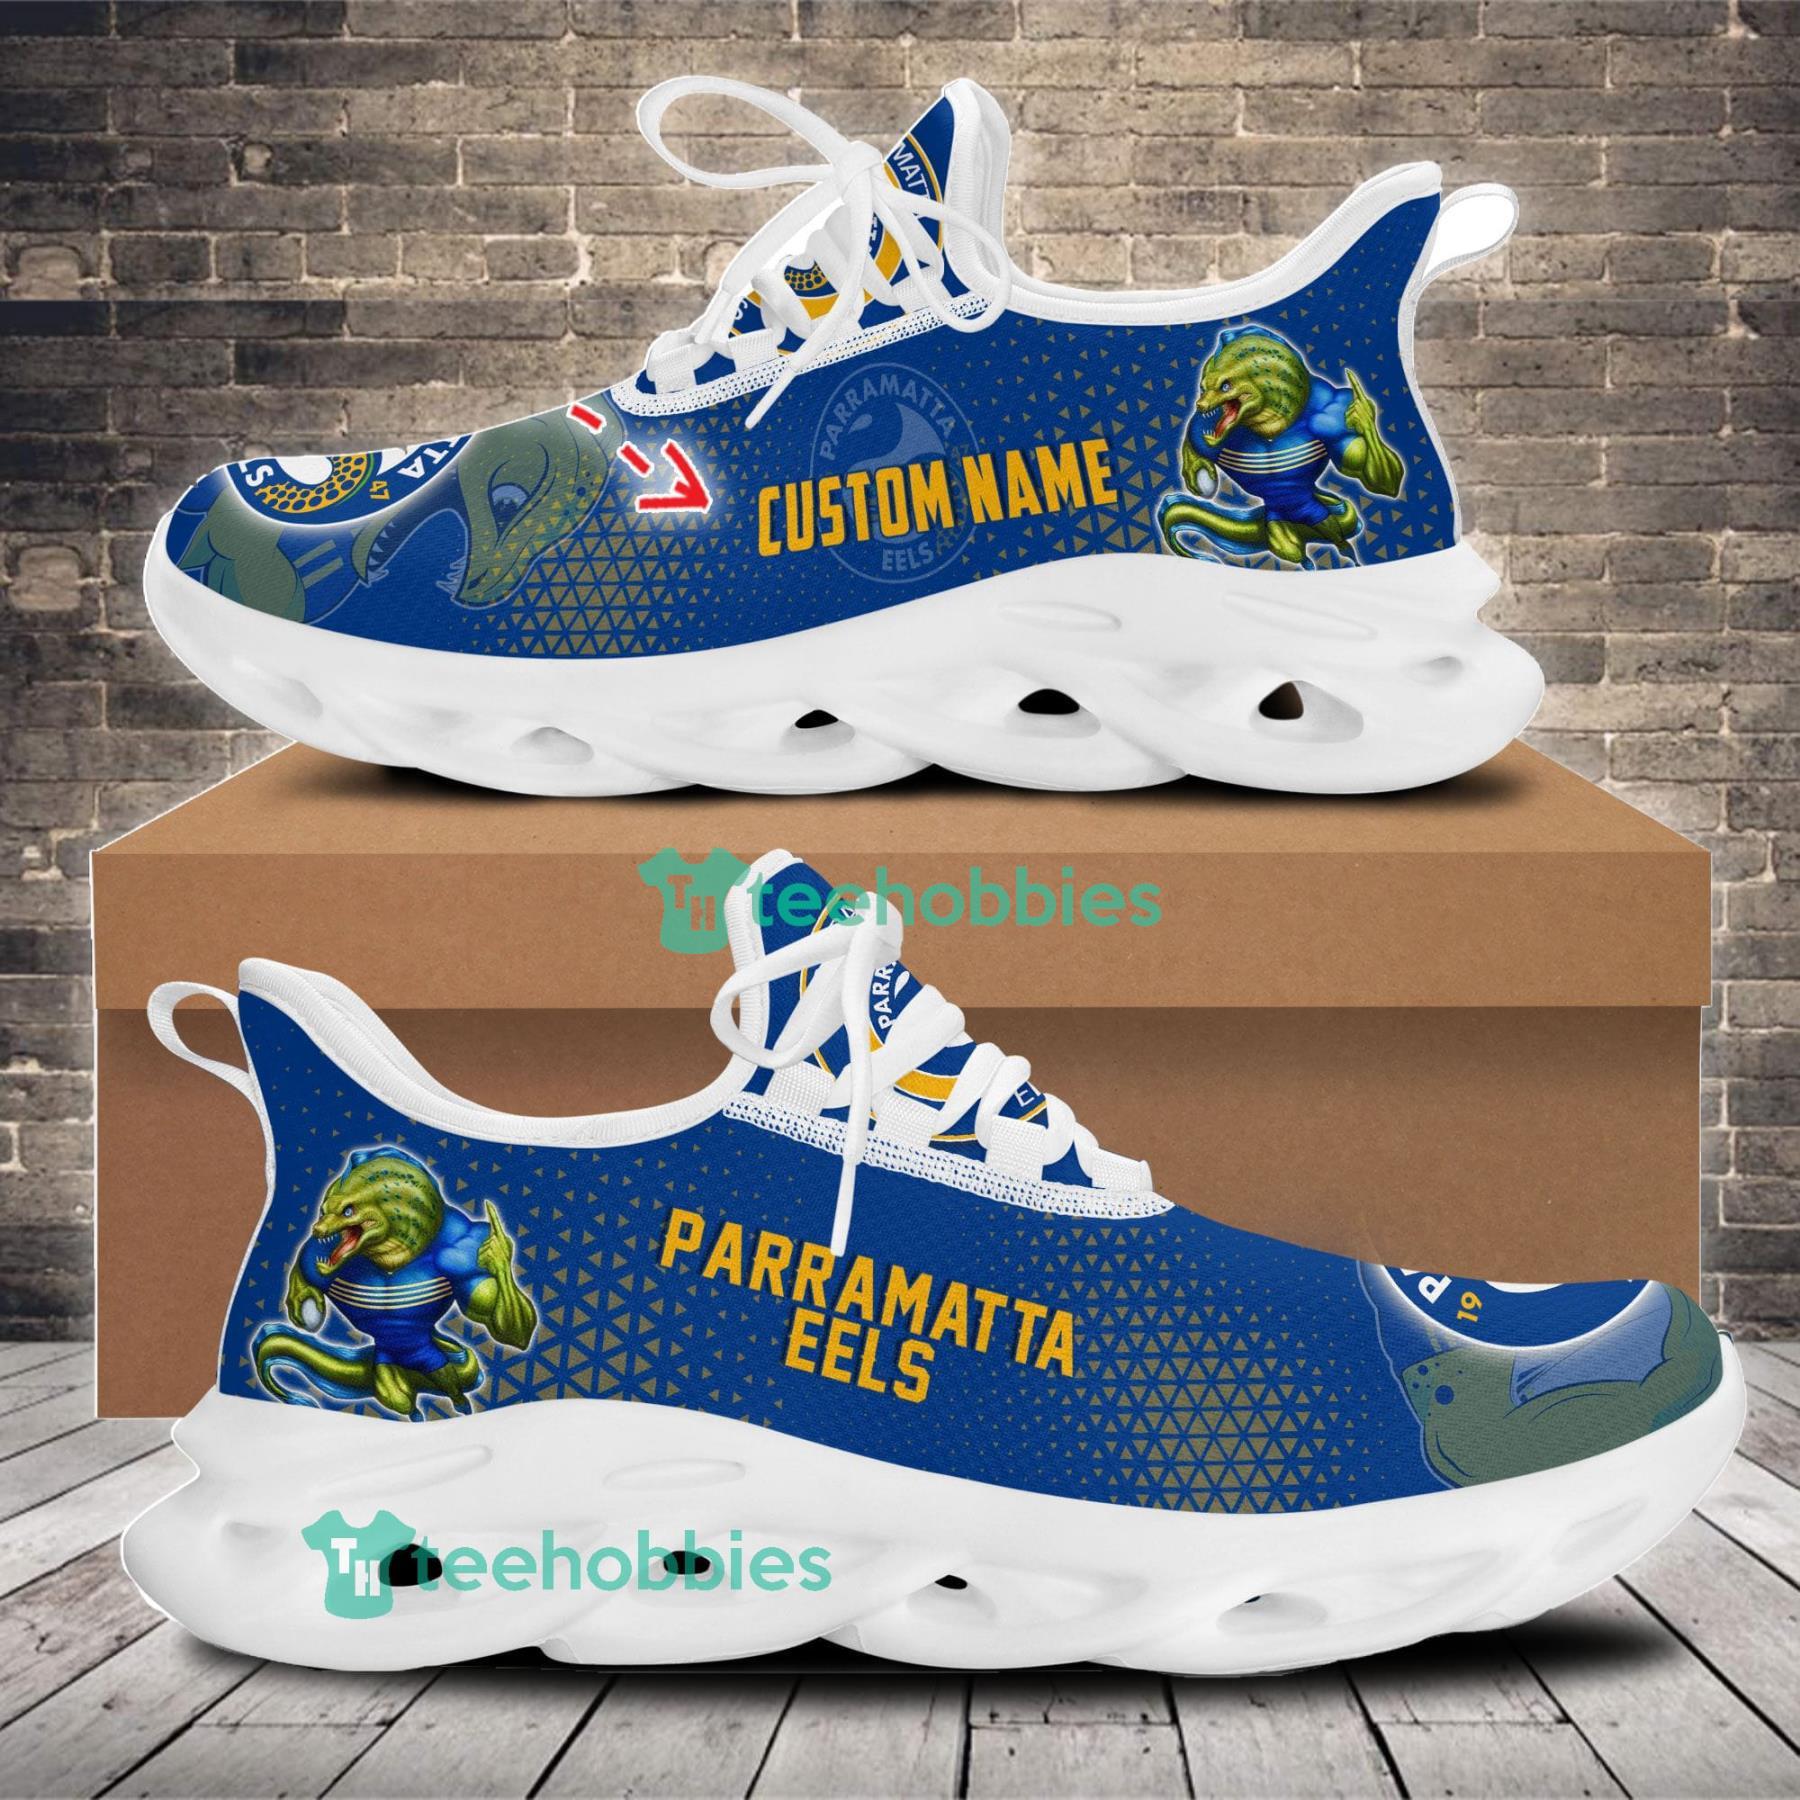 Parramatta Eels Mascot Custom Name Sneakers Max Soul Shoes For Men And Women Nrl Sneakers Product Photo 1